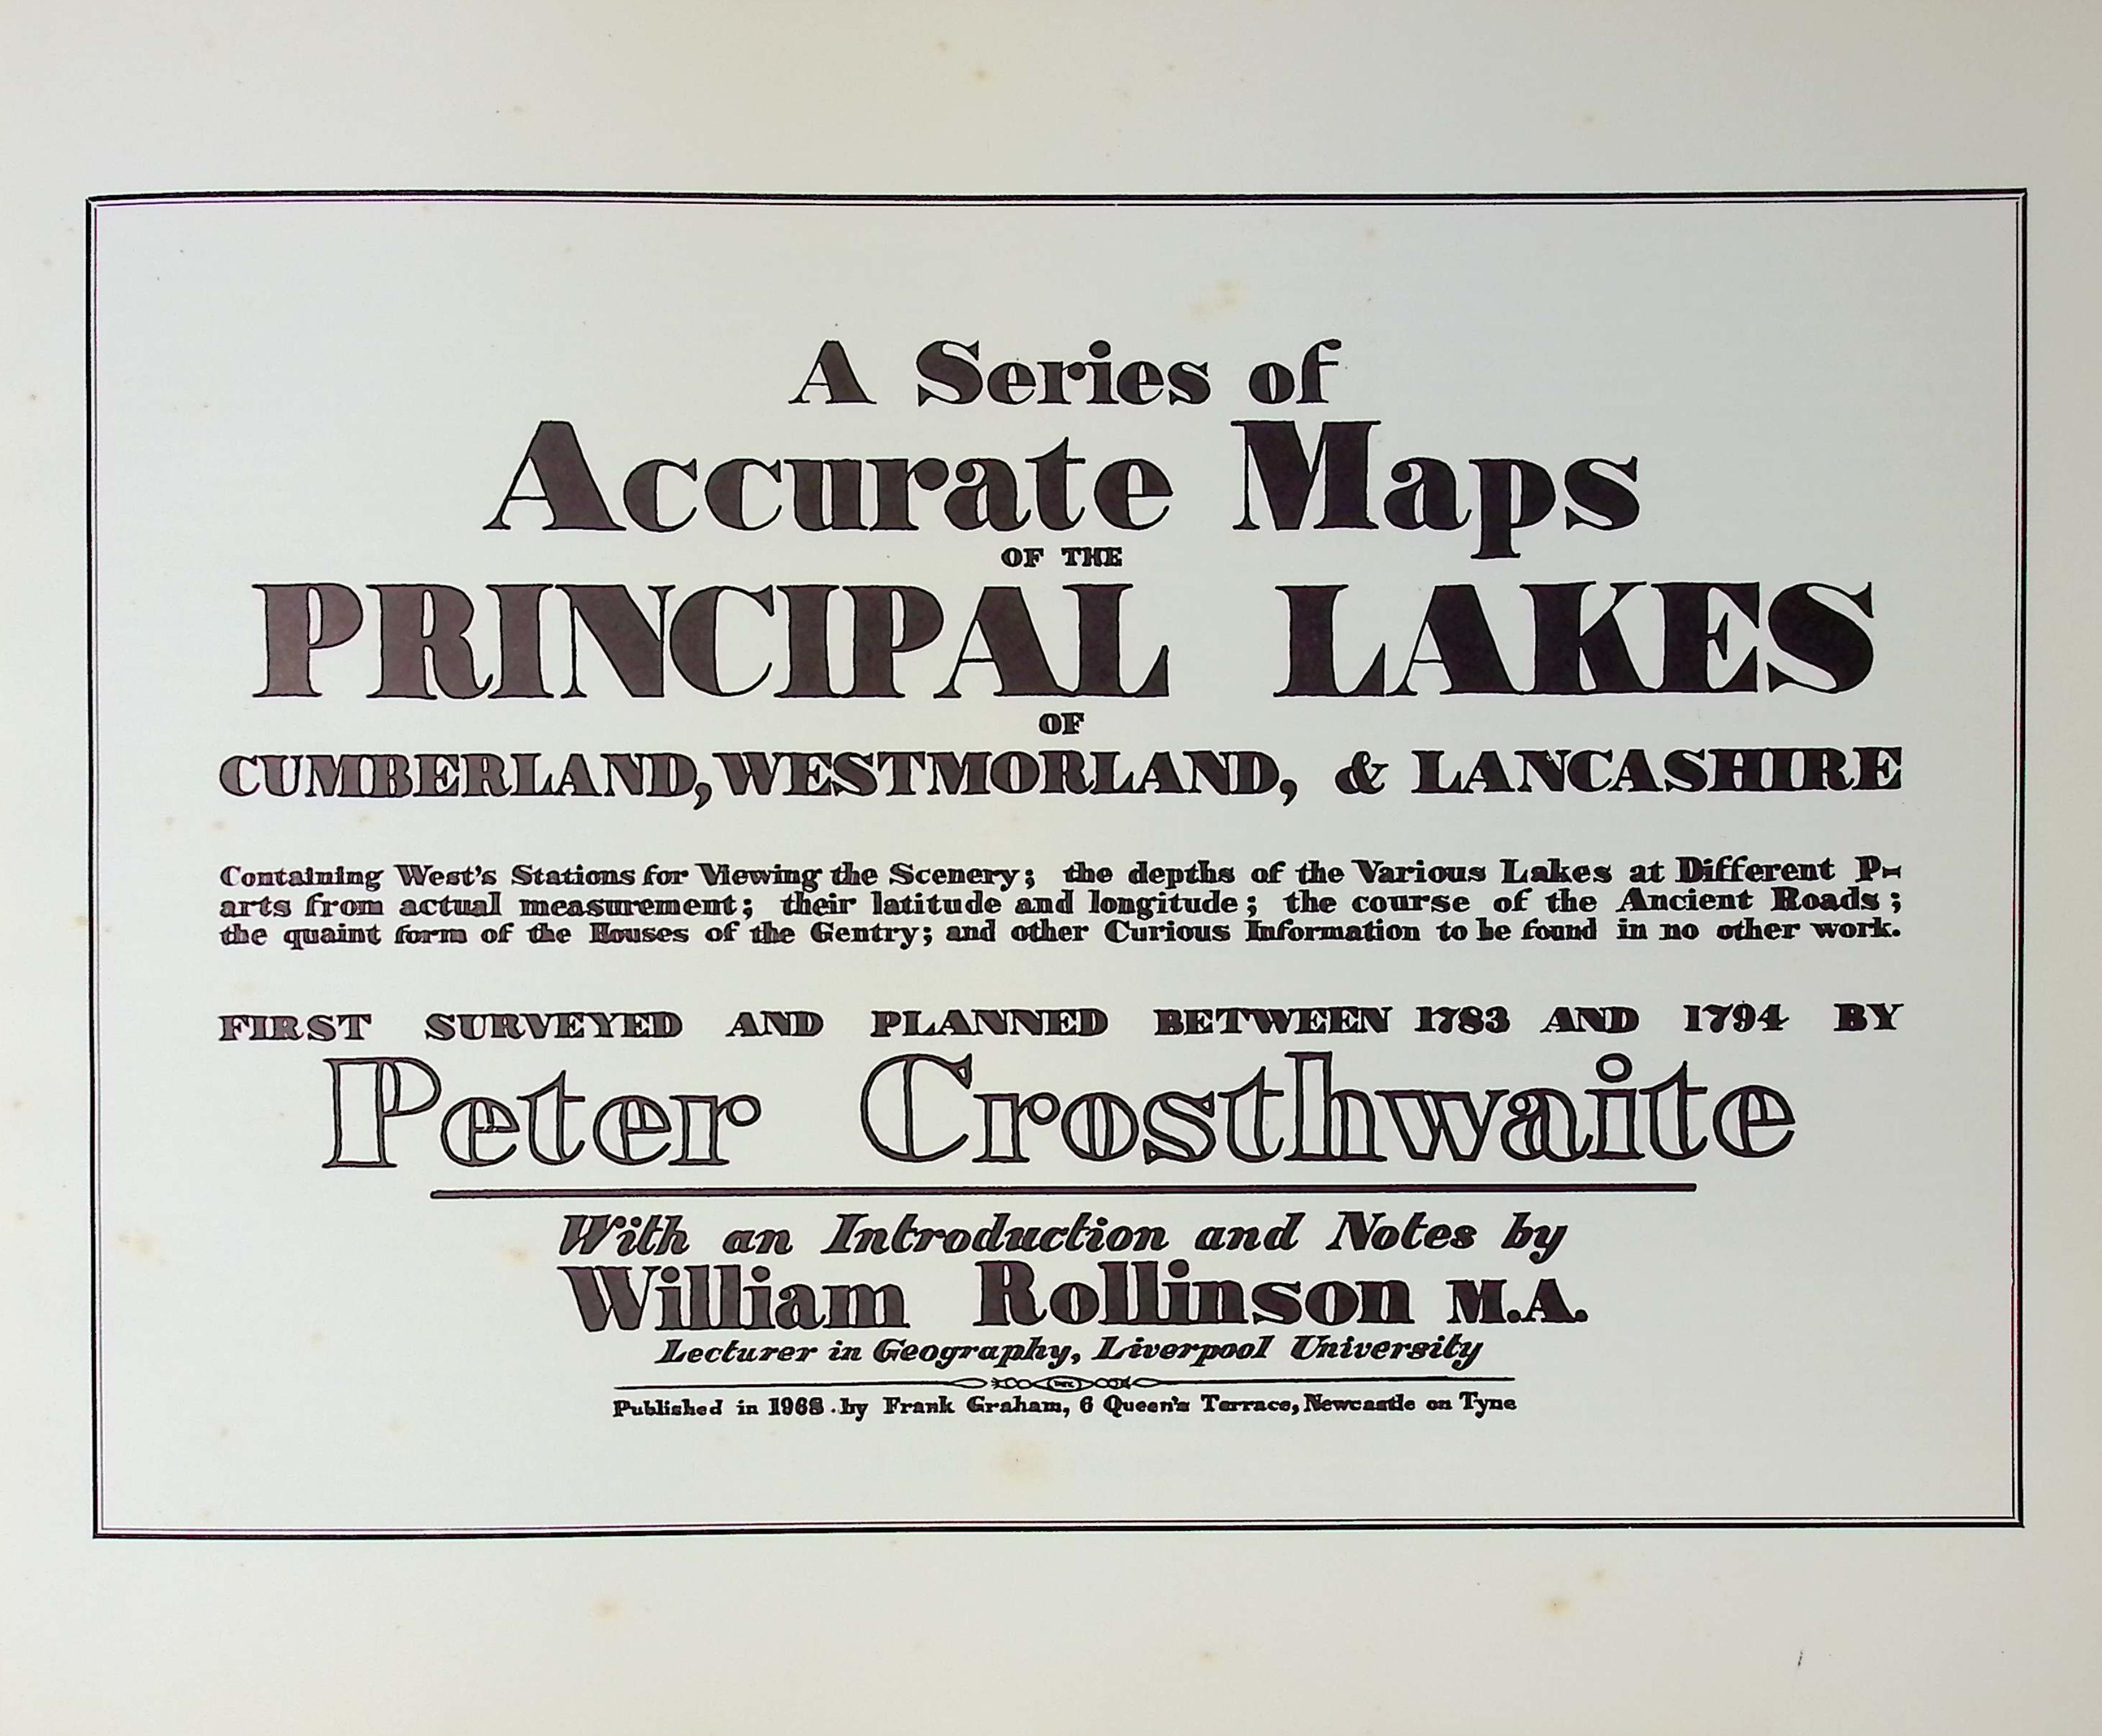 A Series of Accurate Maps of the Principal Lakes of Cumberland, Westmorland, and Lancashire First Surveyed and Planned between 1783 and 1794 by Peter Crosthwaite. With an Introduction and Notes by William Rollinson.